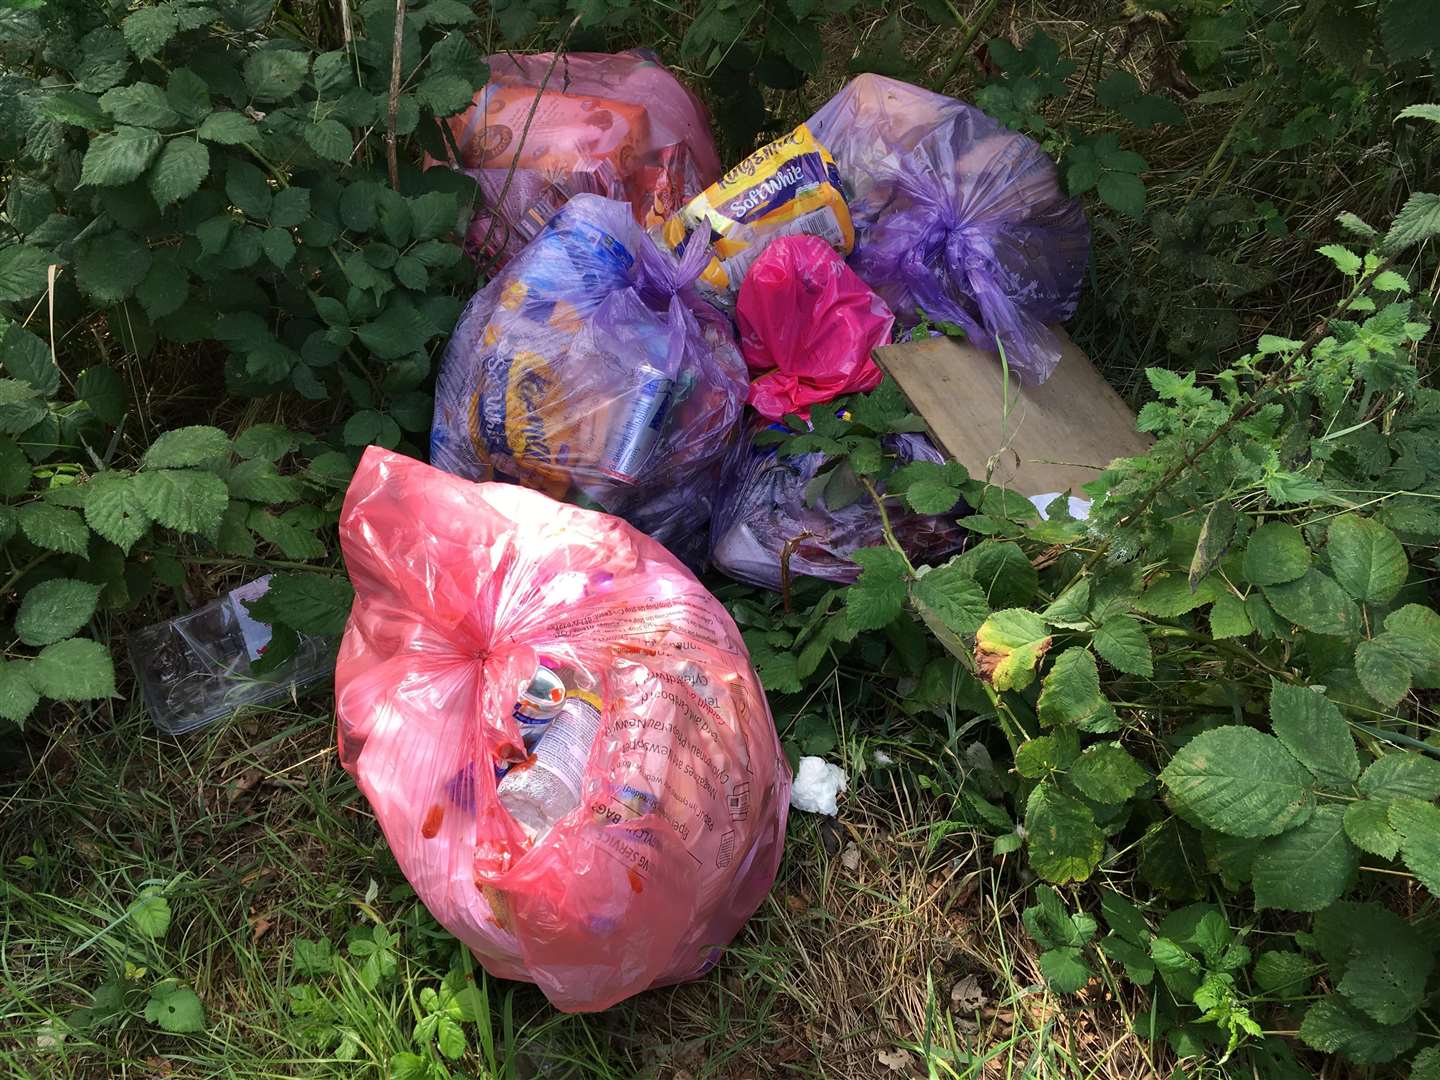 Rubbish left behind by travellers at Mote Park in Maidstone